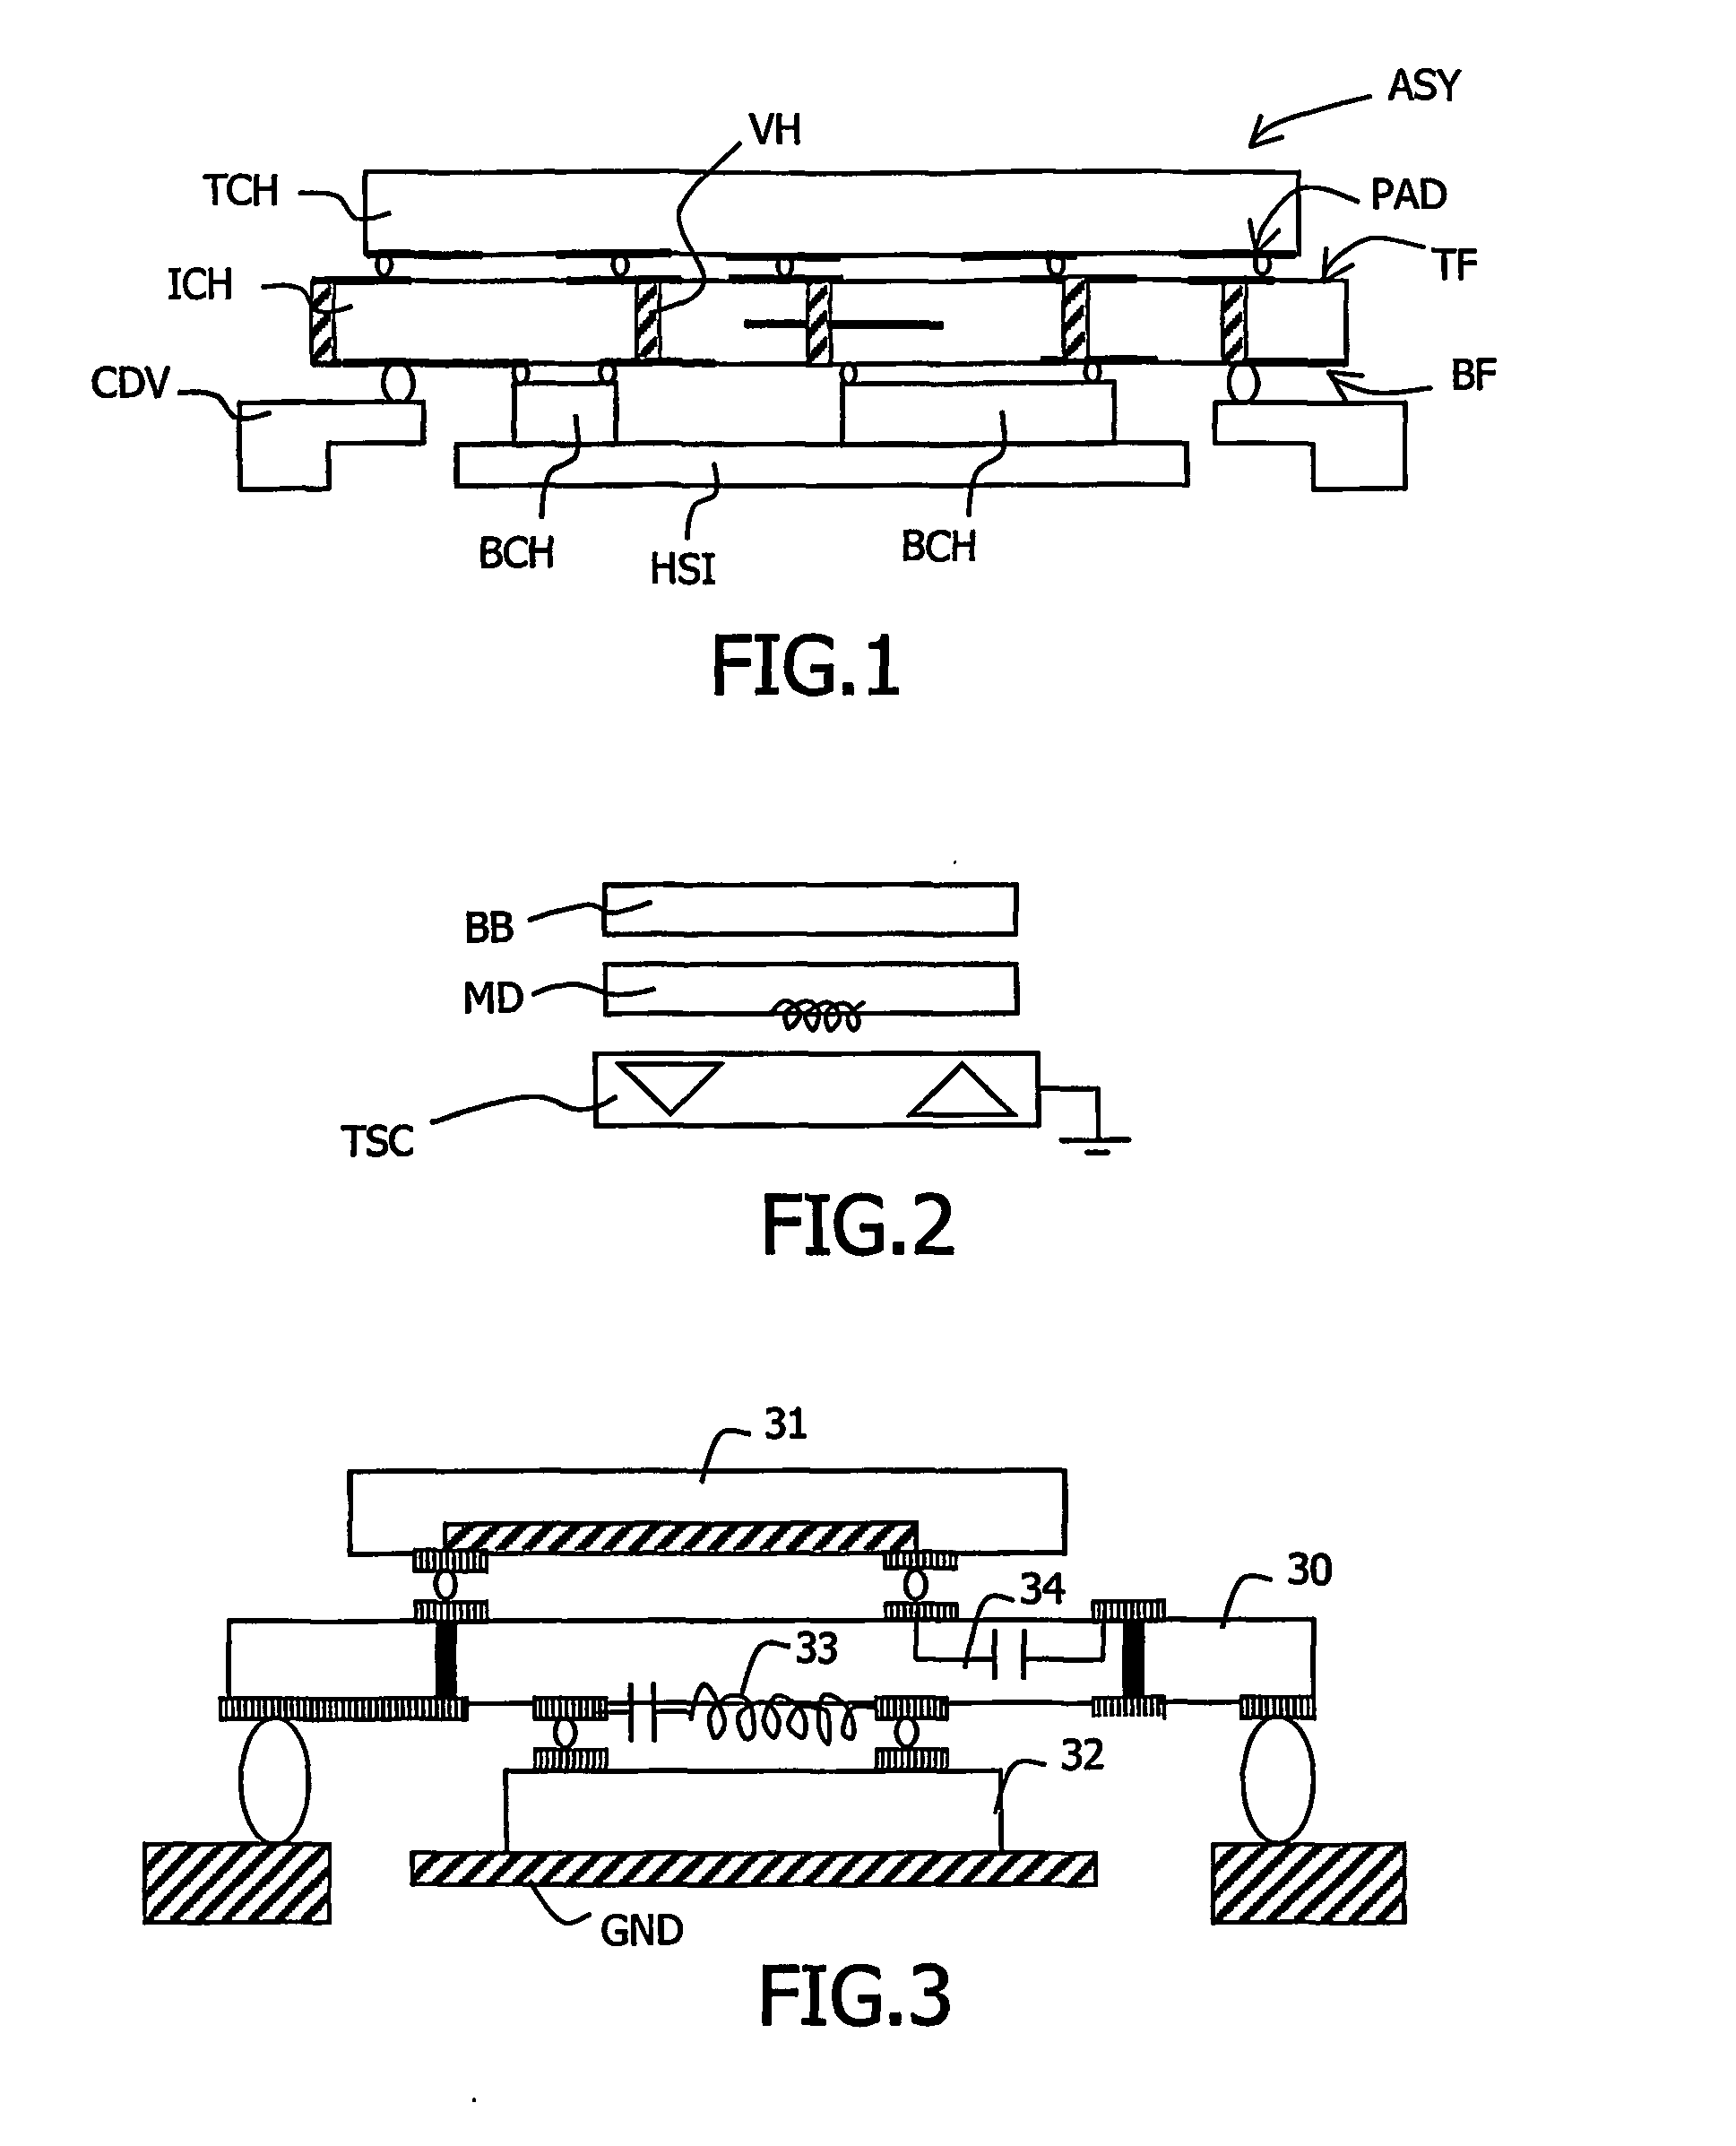 Optimized multi-apparation assembly